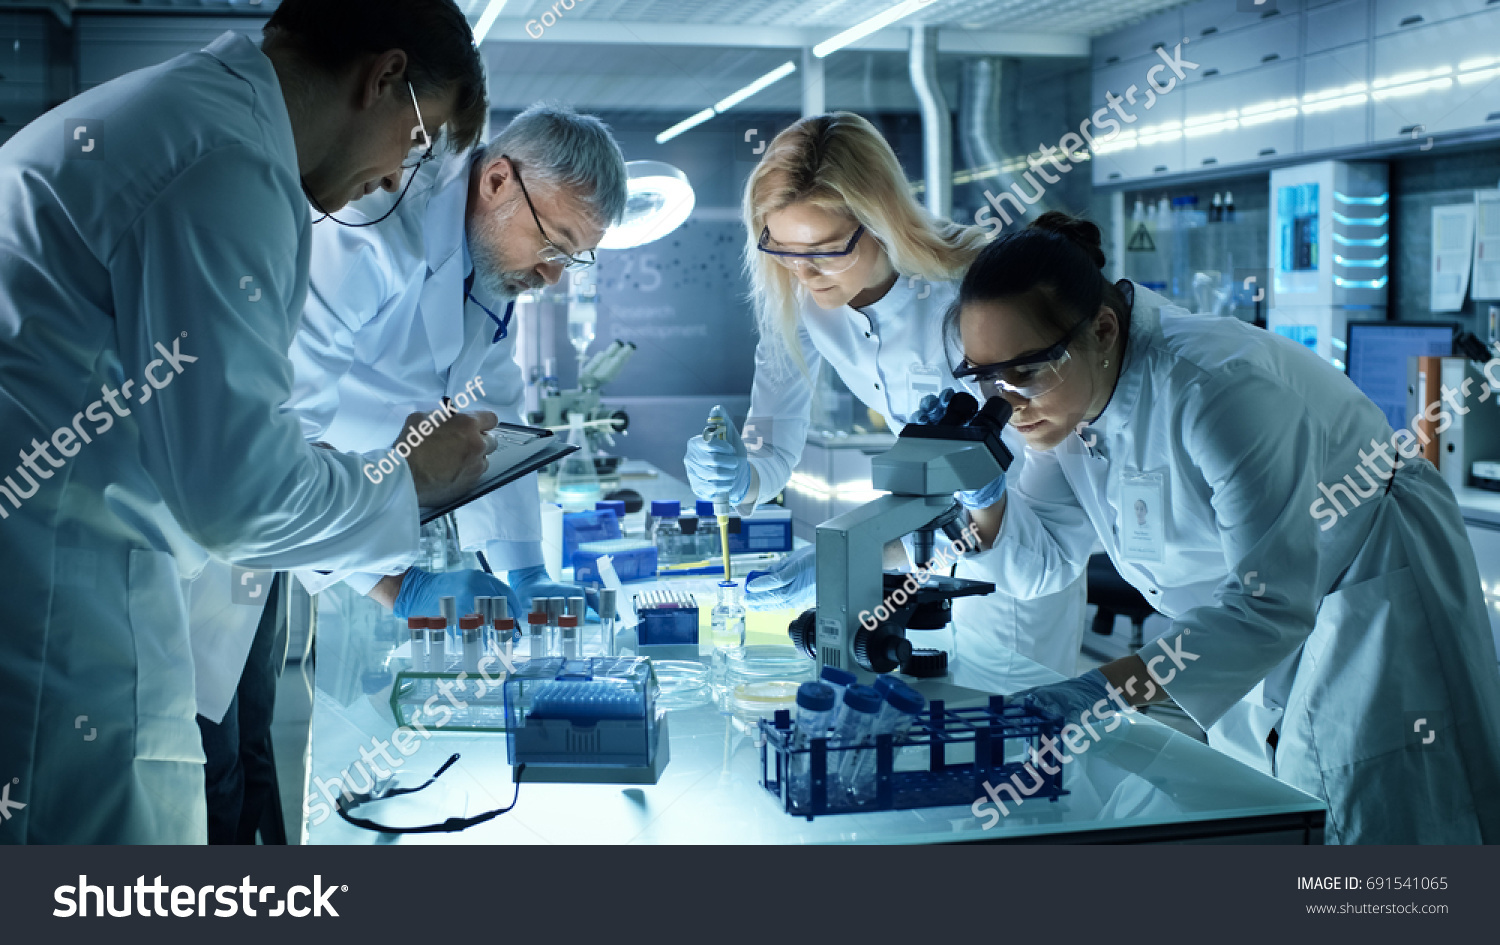 Team of Medical Research Scientists Collectively Working on a New Generation Experimental Drug Treatment. Laboratory Looks Busy, Bright and Modern. #691541065